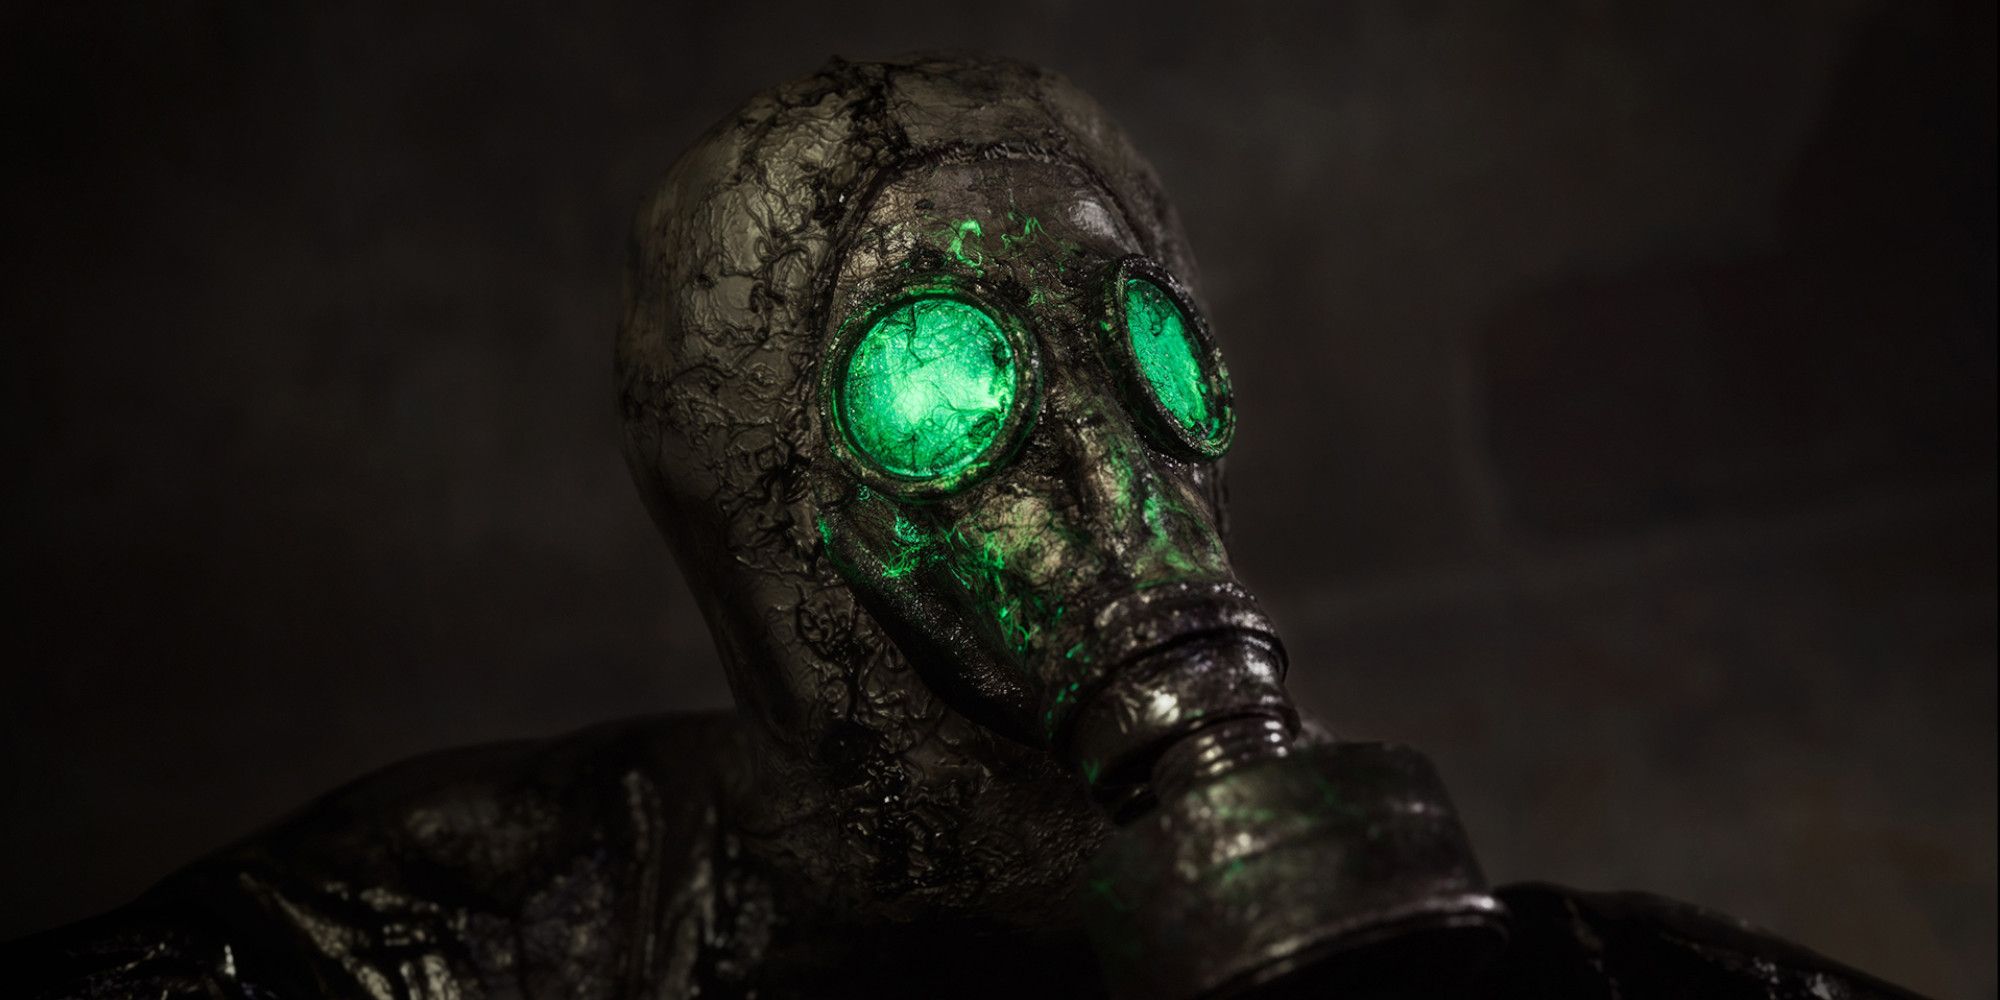 Super-close up image of a soldier possessed and mutated by Chernobylite